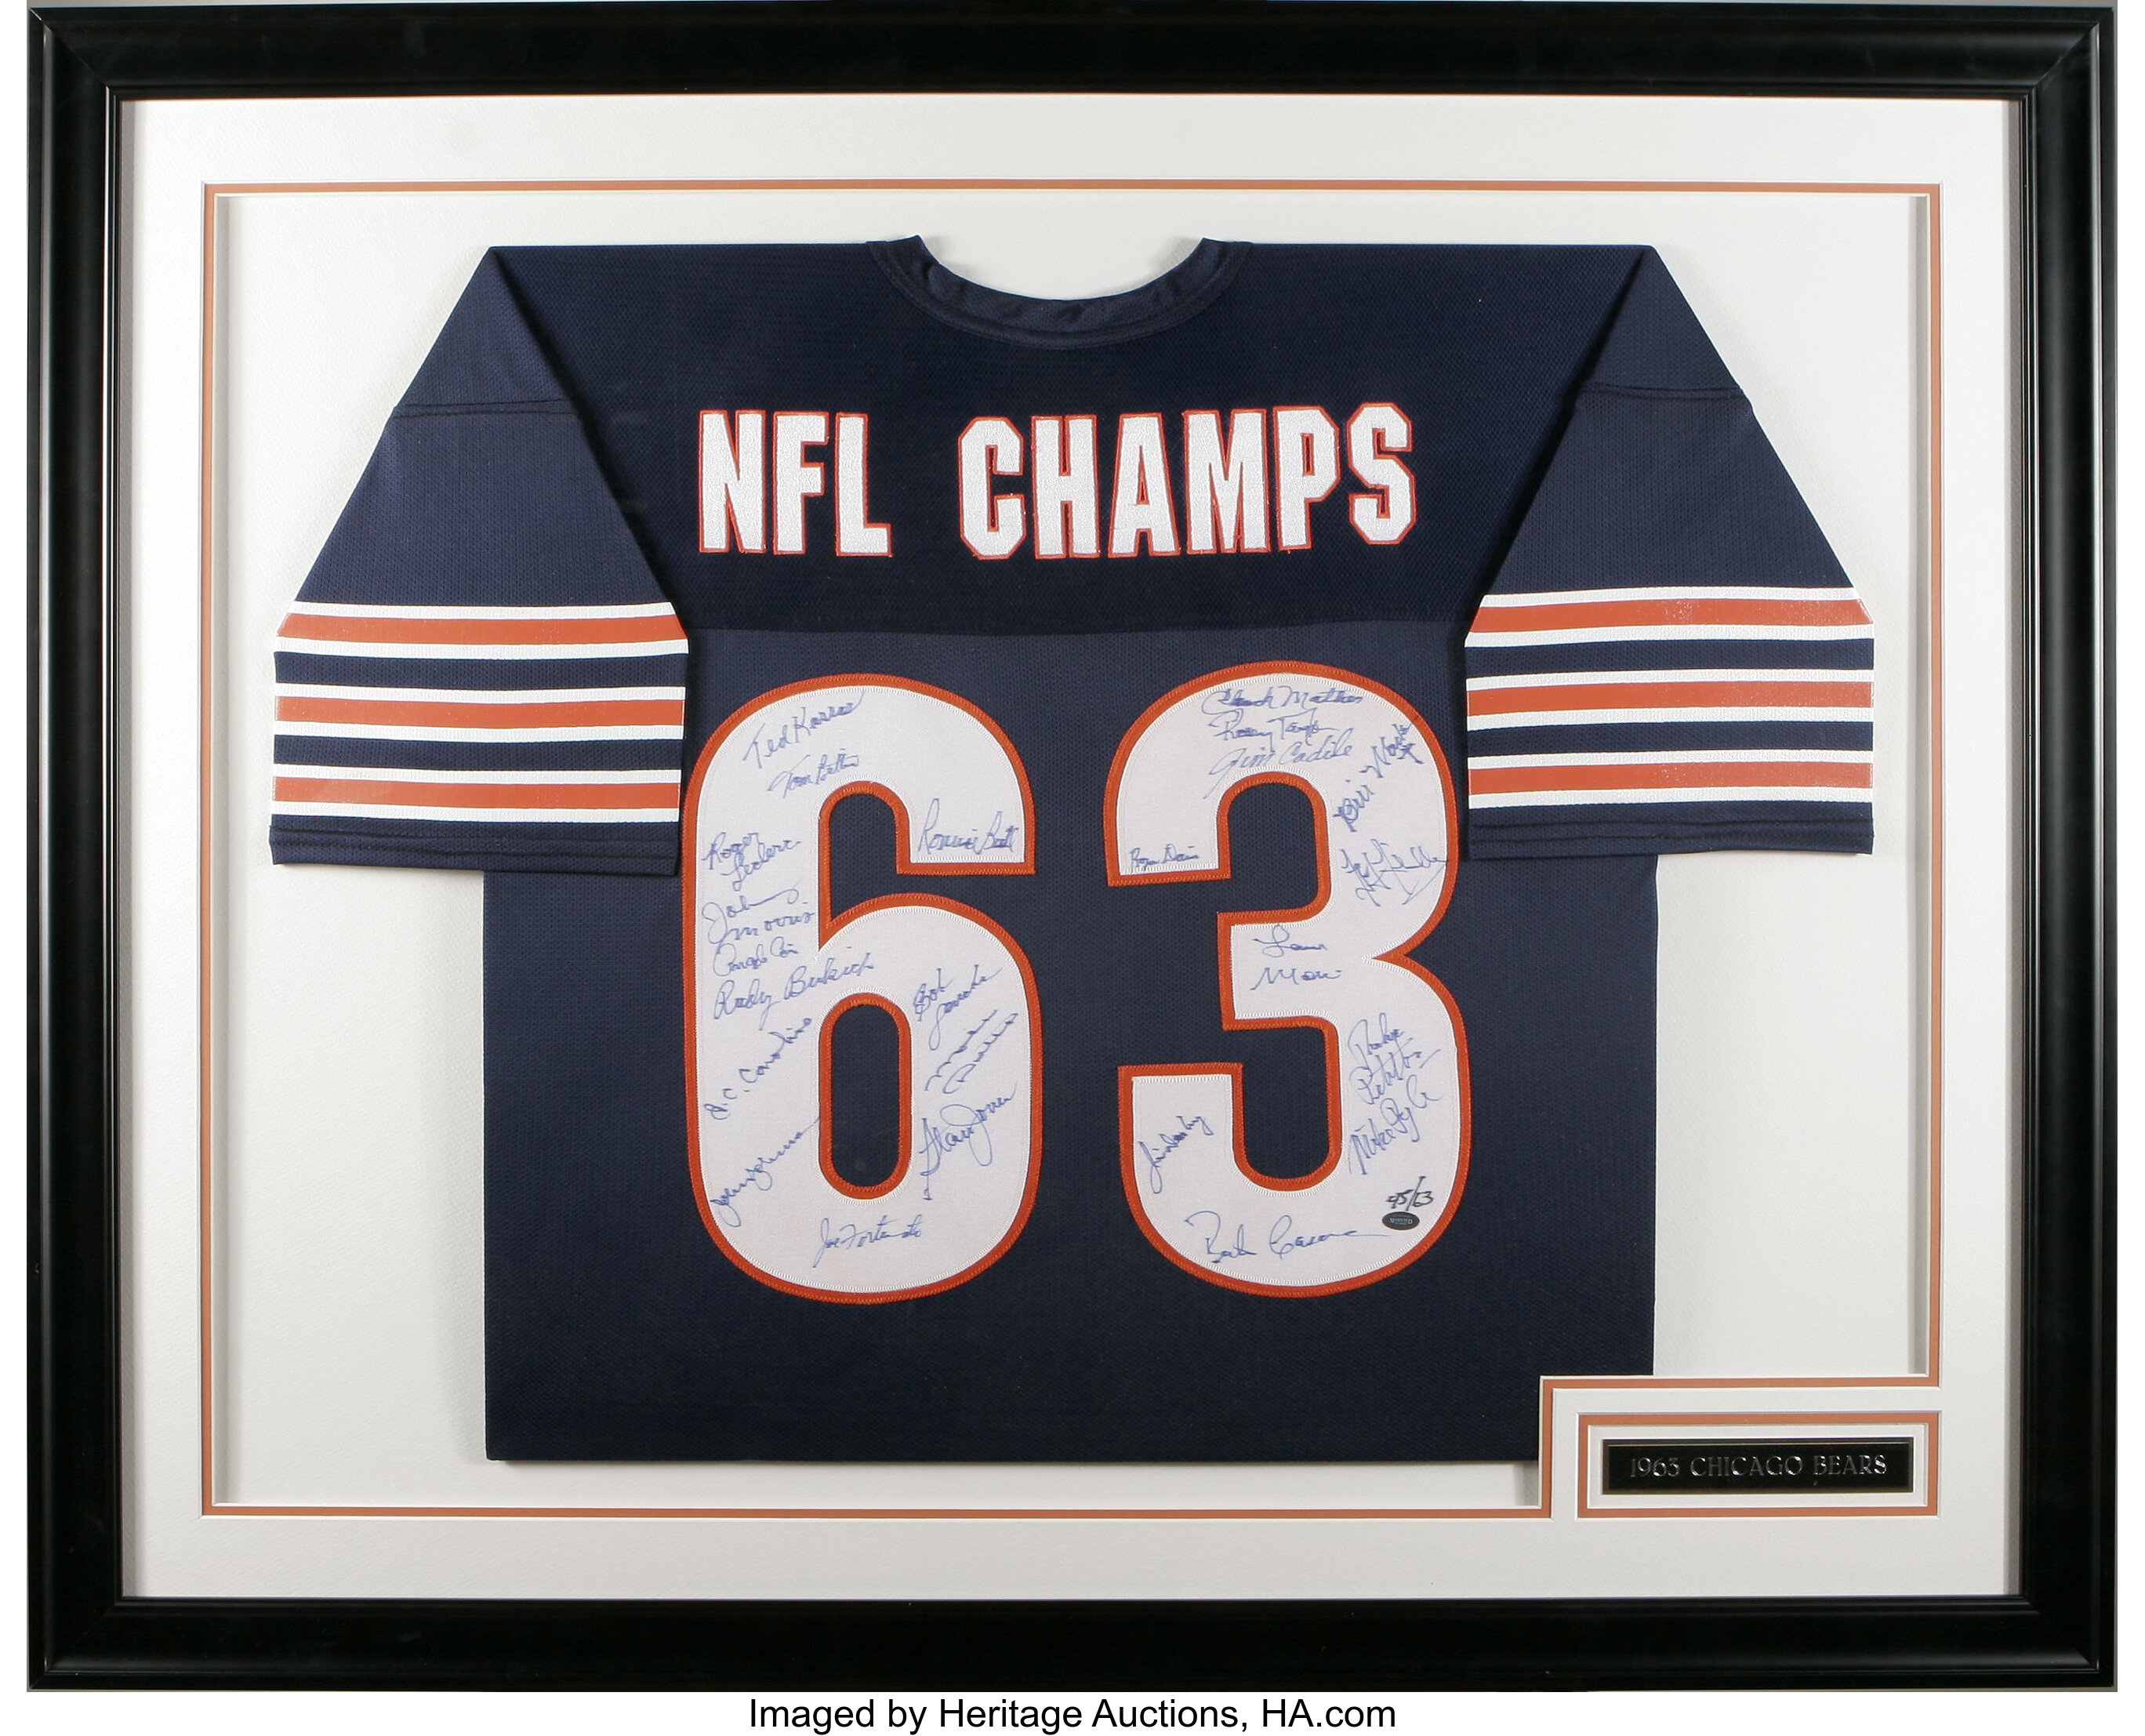 Bleachers Sports Music & Framing — Gale Sayers Signed Chicago Bears Jersey  - PSA DNA COA Authenticated - Professionally Framed